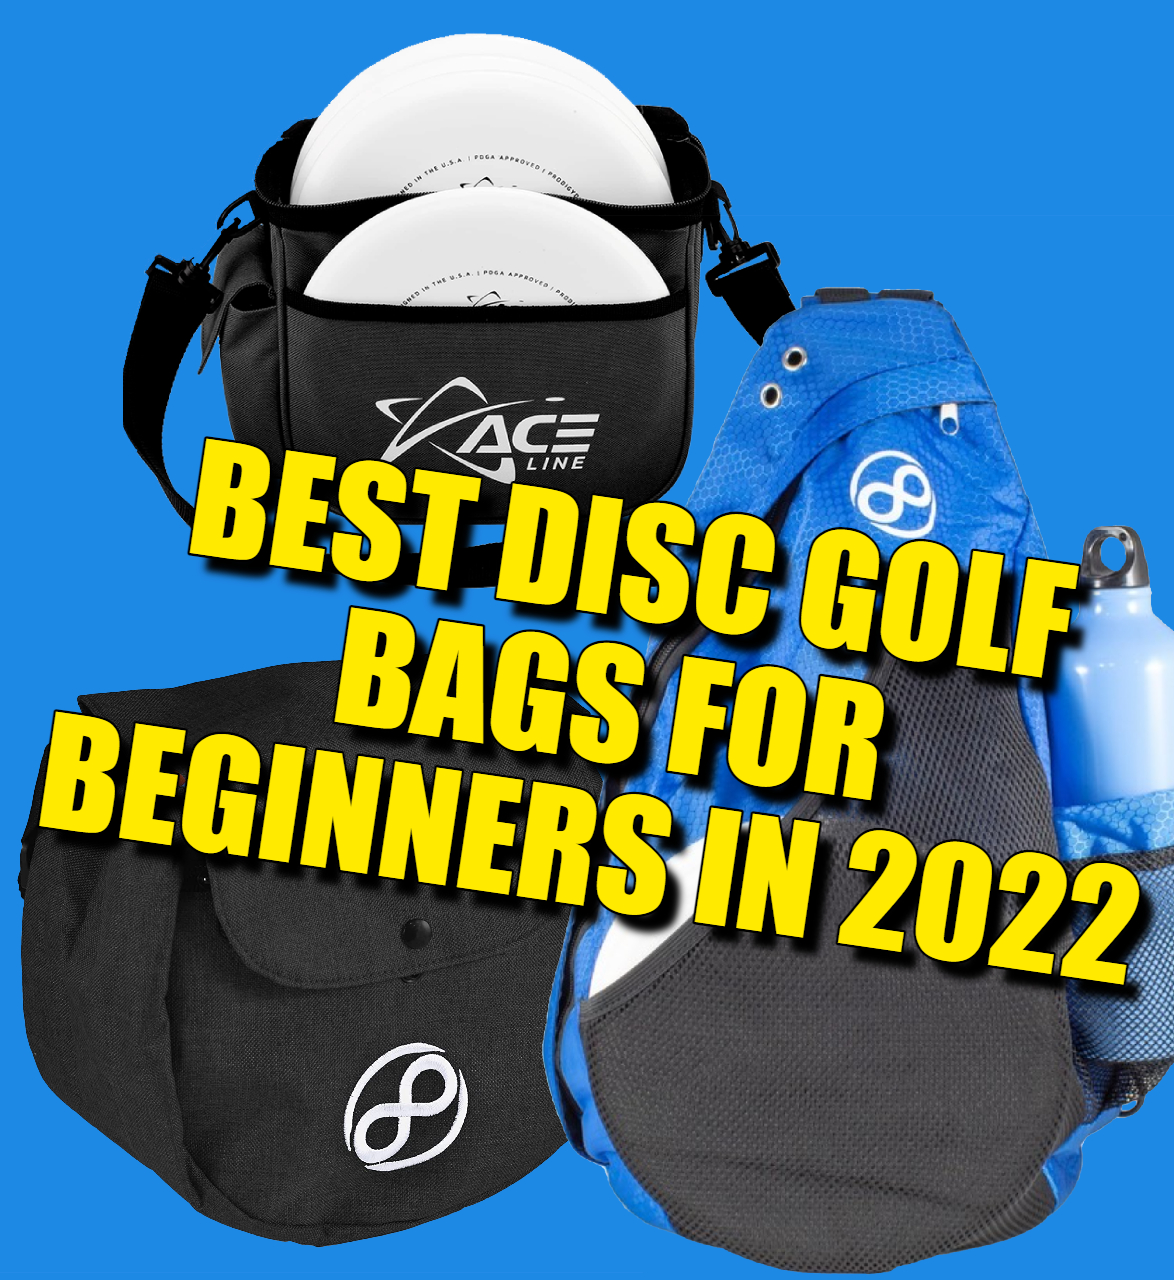 BEST DISC GOLF BAGS FOR BEGINNERS IN 2022